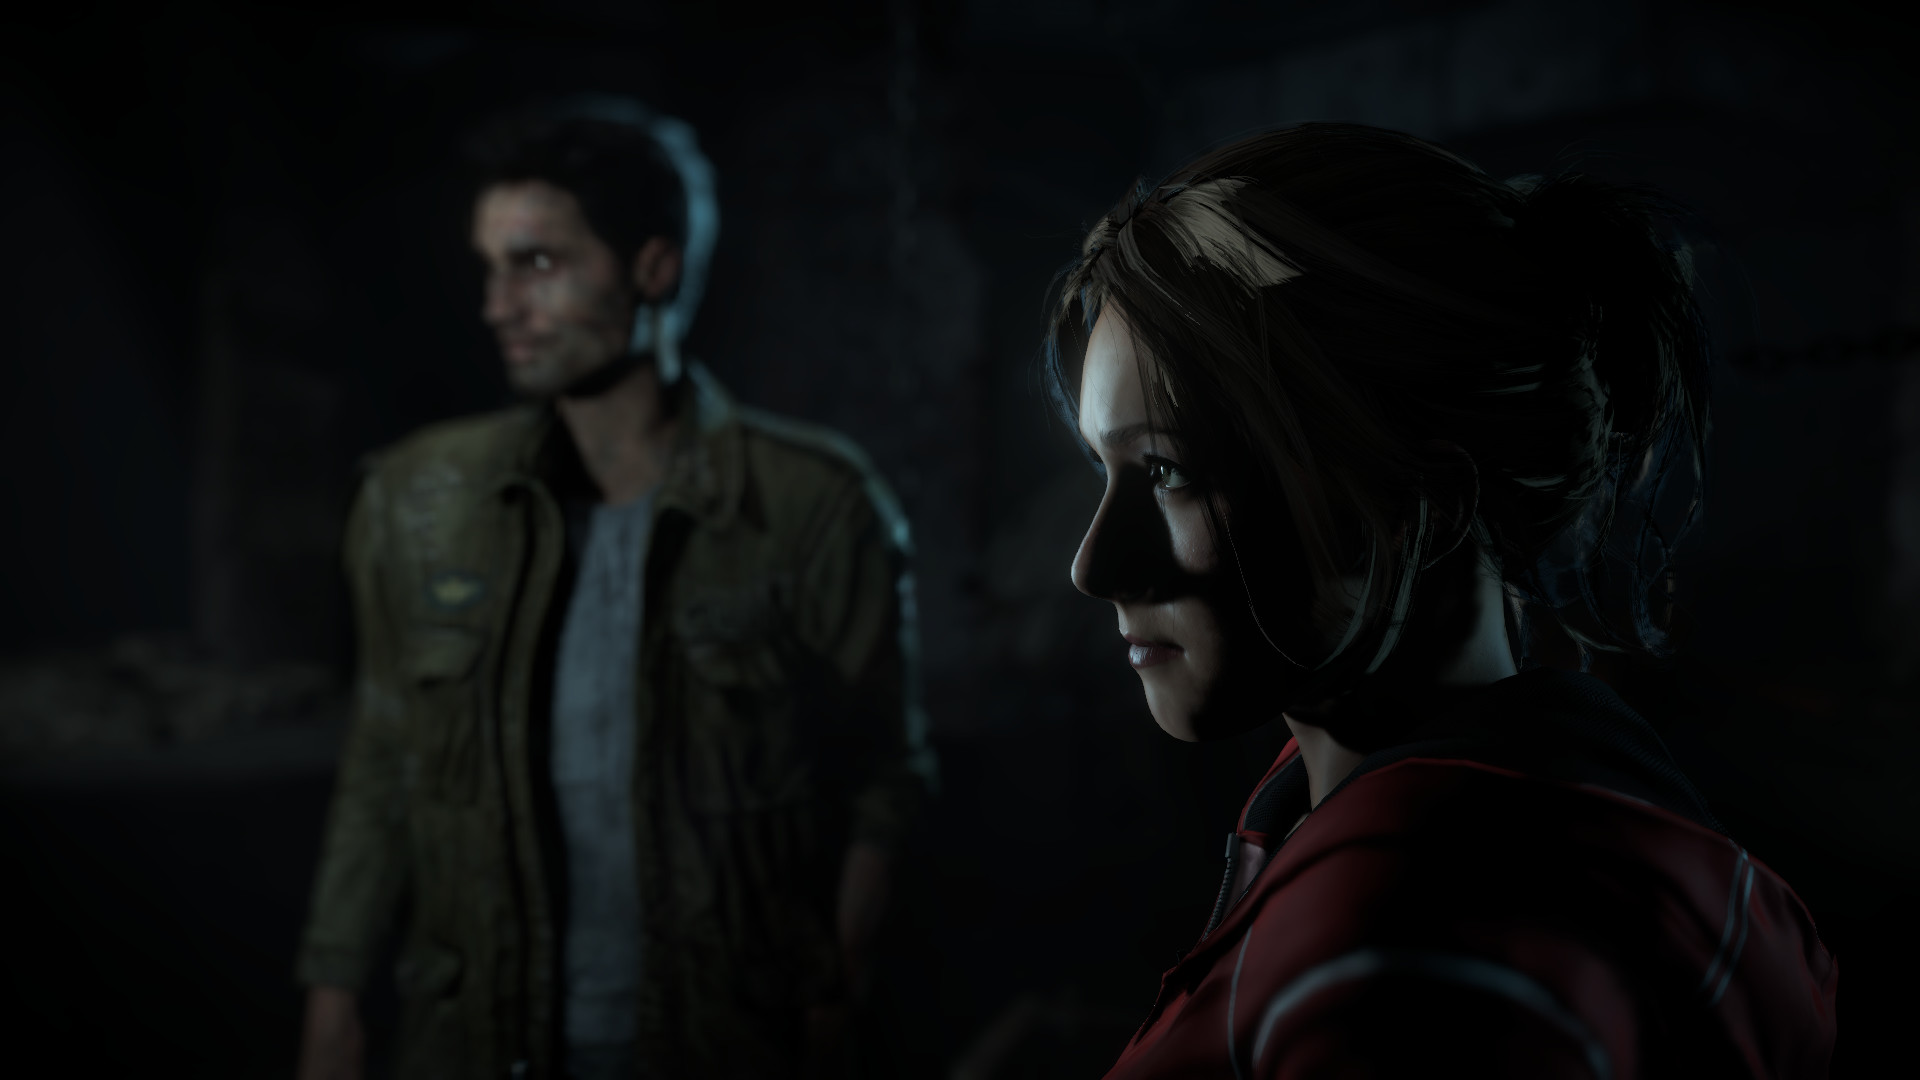 PS4 Exclusive Until Dawn Gets Beautiful 1080p Screenshots Showing Characters and Environments